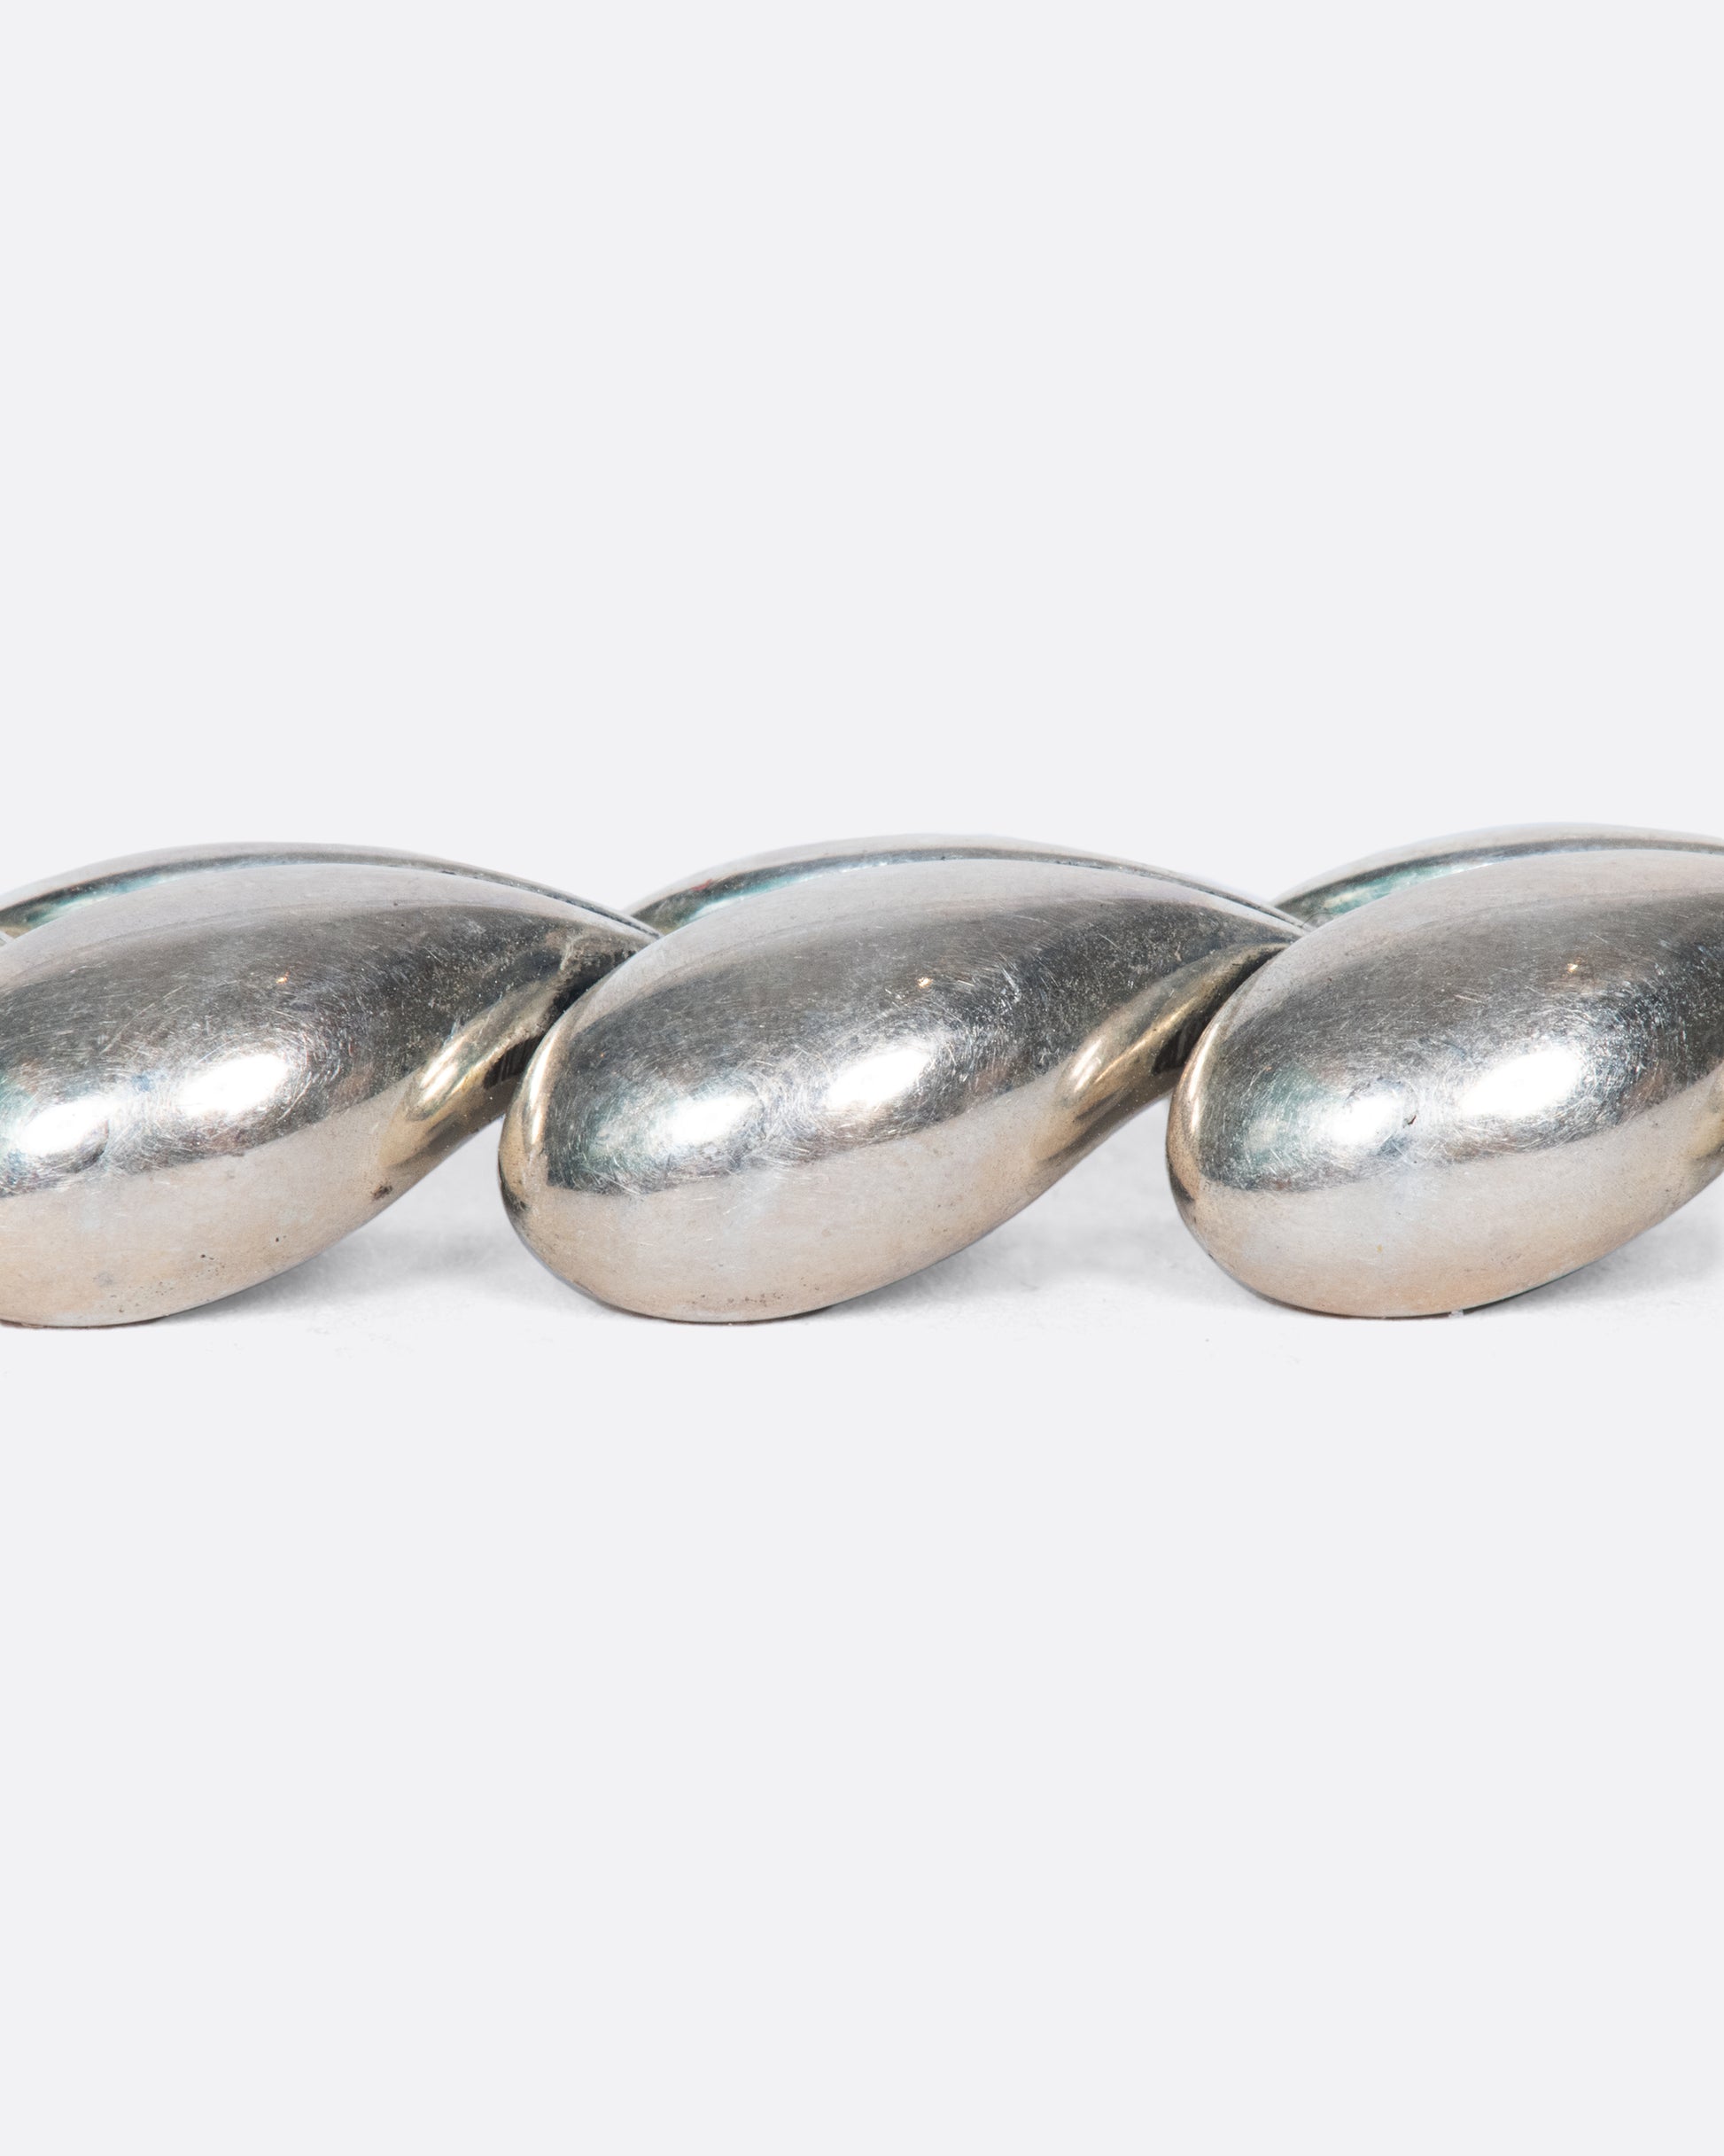 This vintage Thai sterling silver bracelet is made entirely of sweet, puffy hearts.